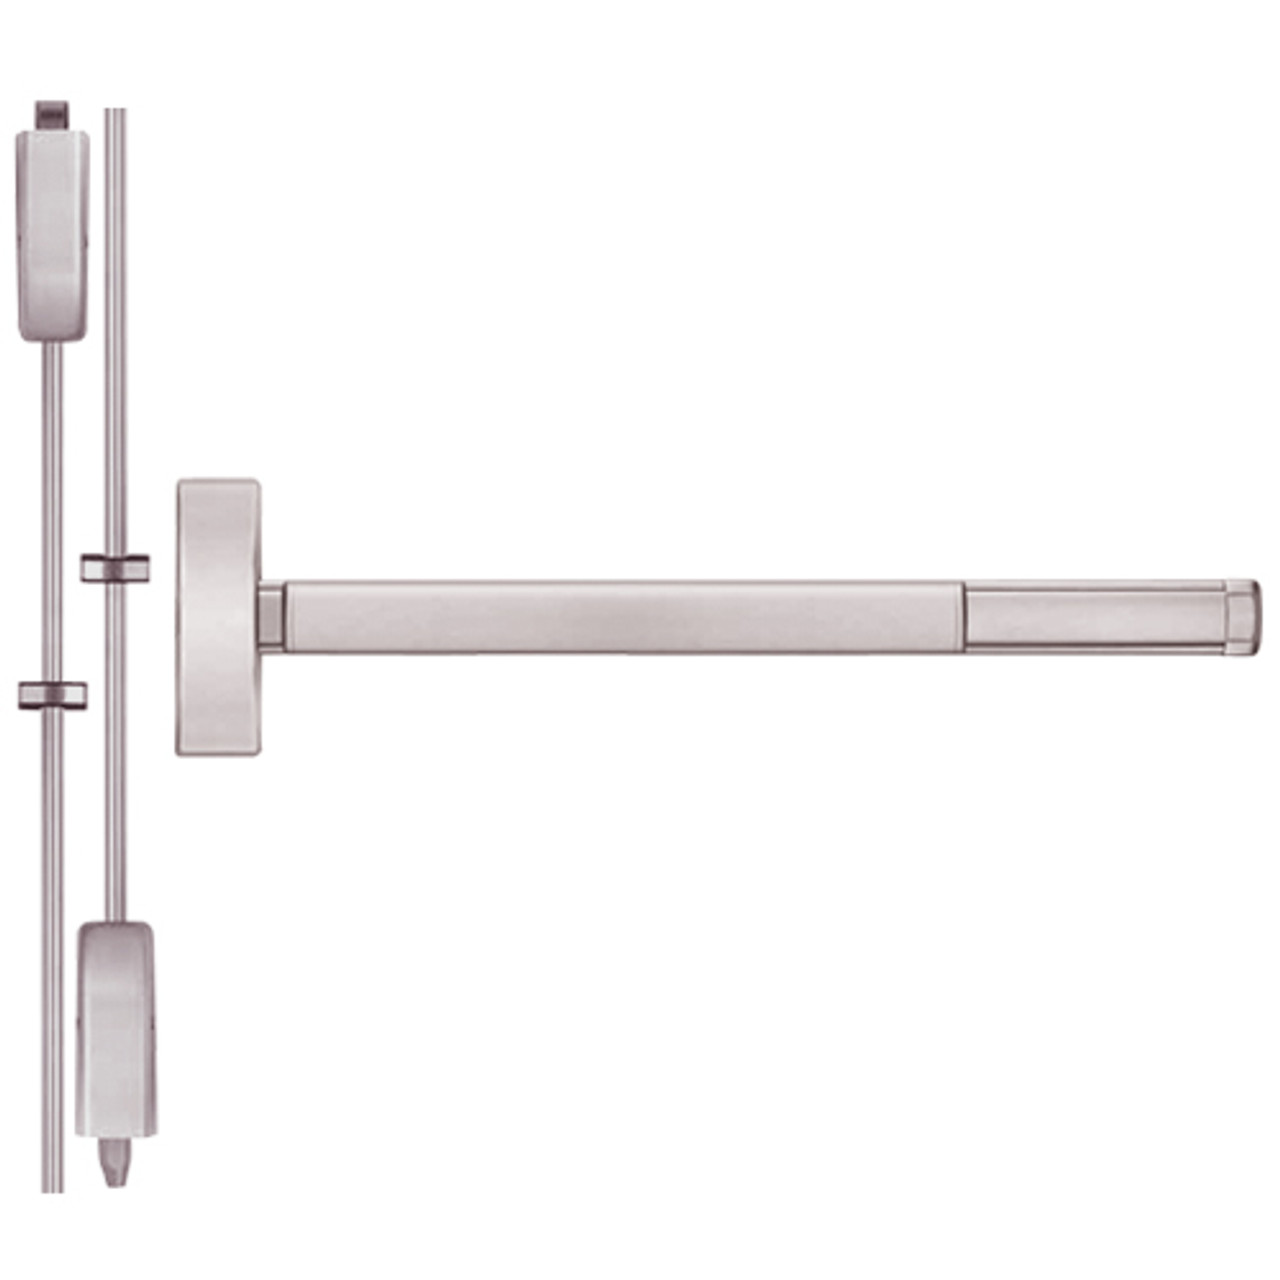 DE2202LBR-628-36 PHI 2200 Series Non Fire Rated Apex Surface Vertical Rod Device with Delayed Egress Prepped for Dummy Trim in Satin Aluminum Finish